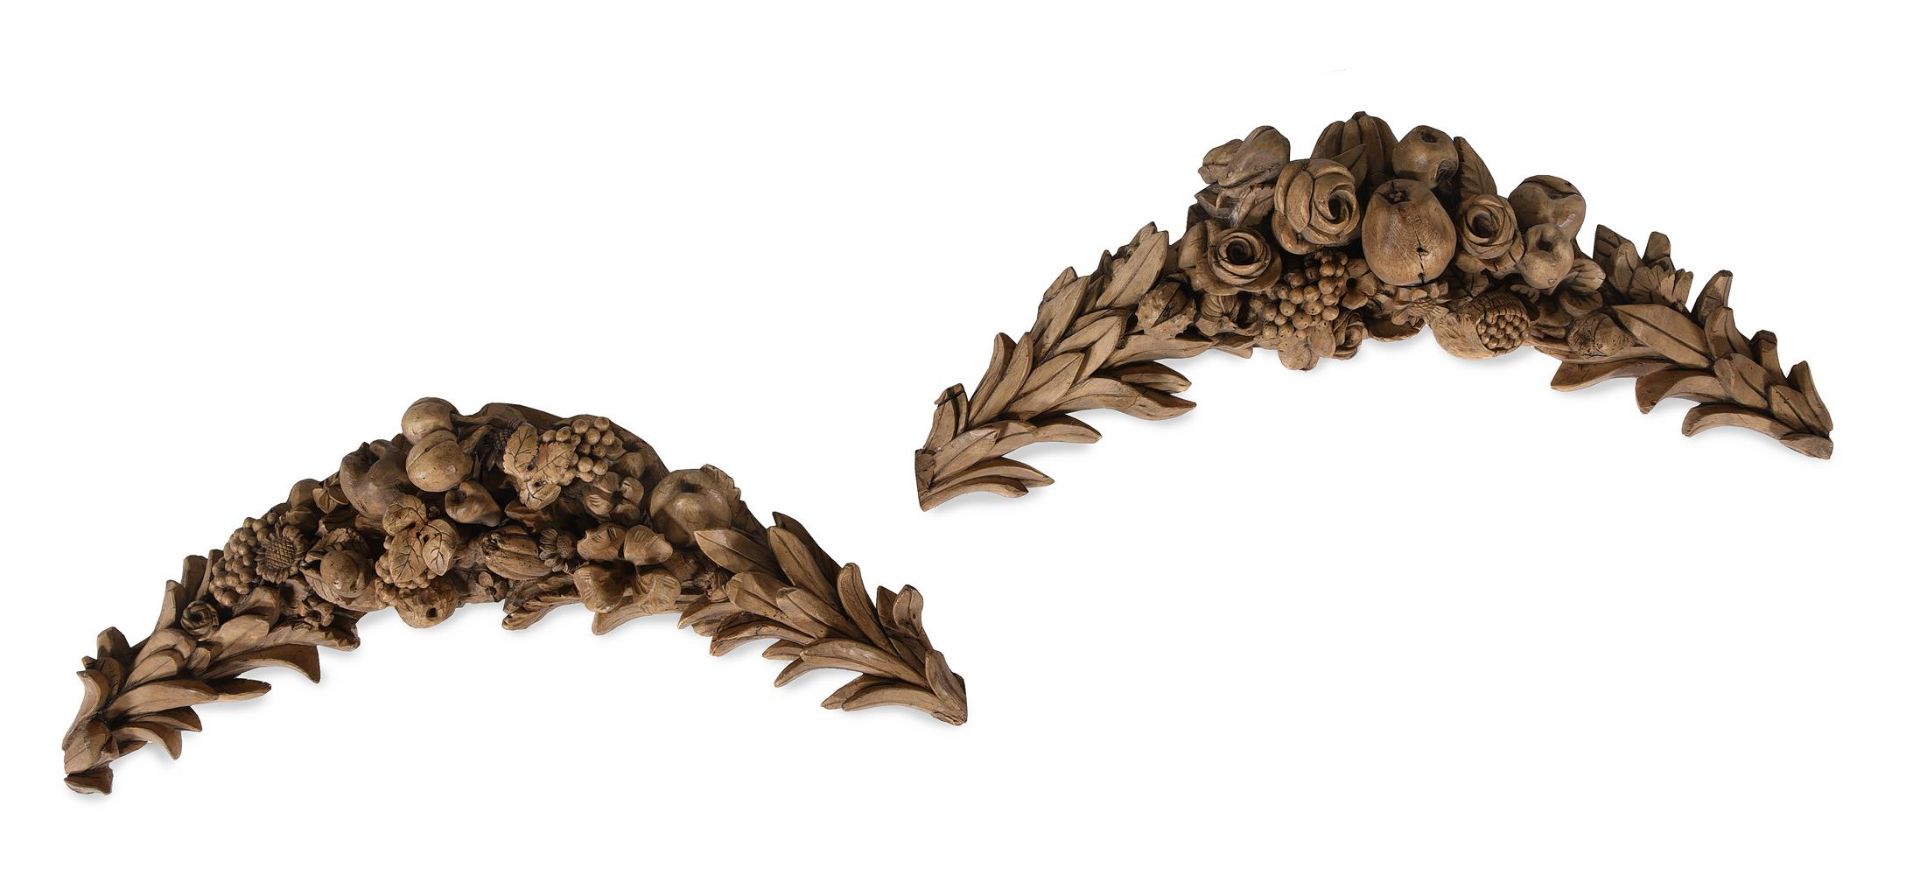 A PAIR OF CARVED WOOD FRUIT AND FLORAL SWAGS, 19TH CENTURY, IN THE EARLY 18TH CENTURY GIBBONS MANNER